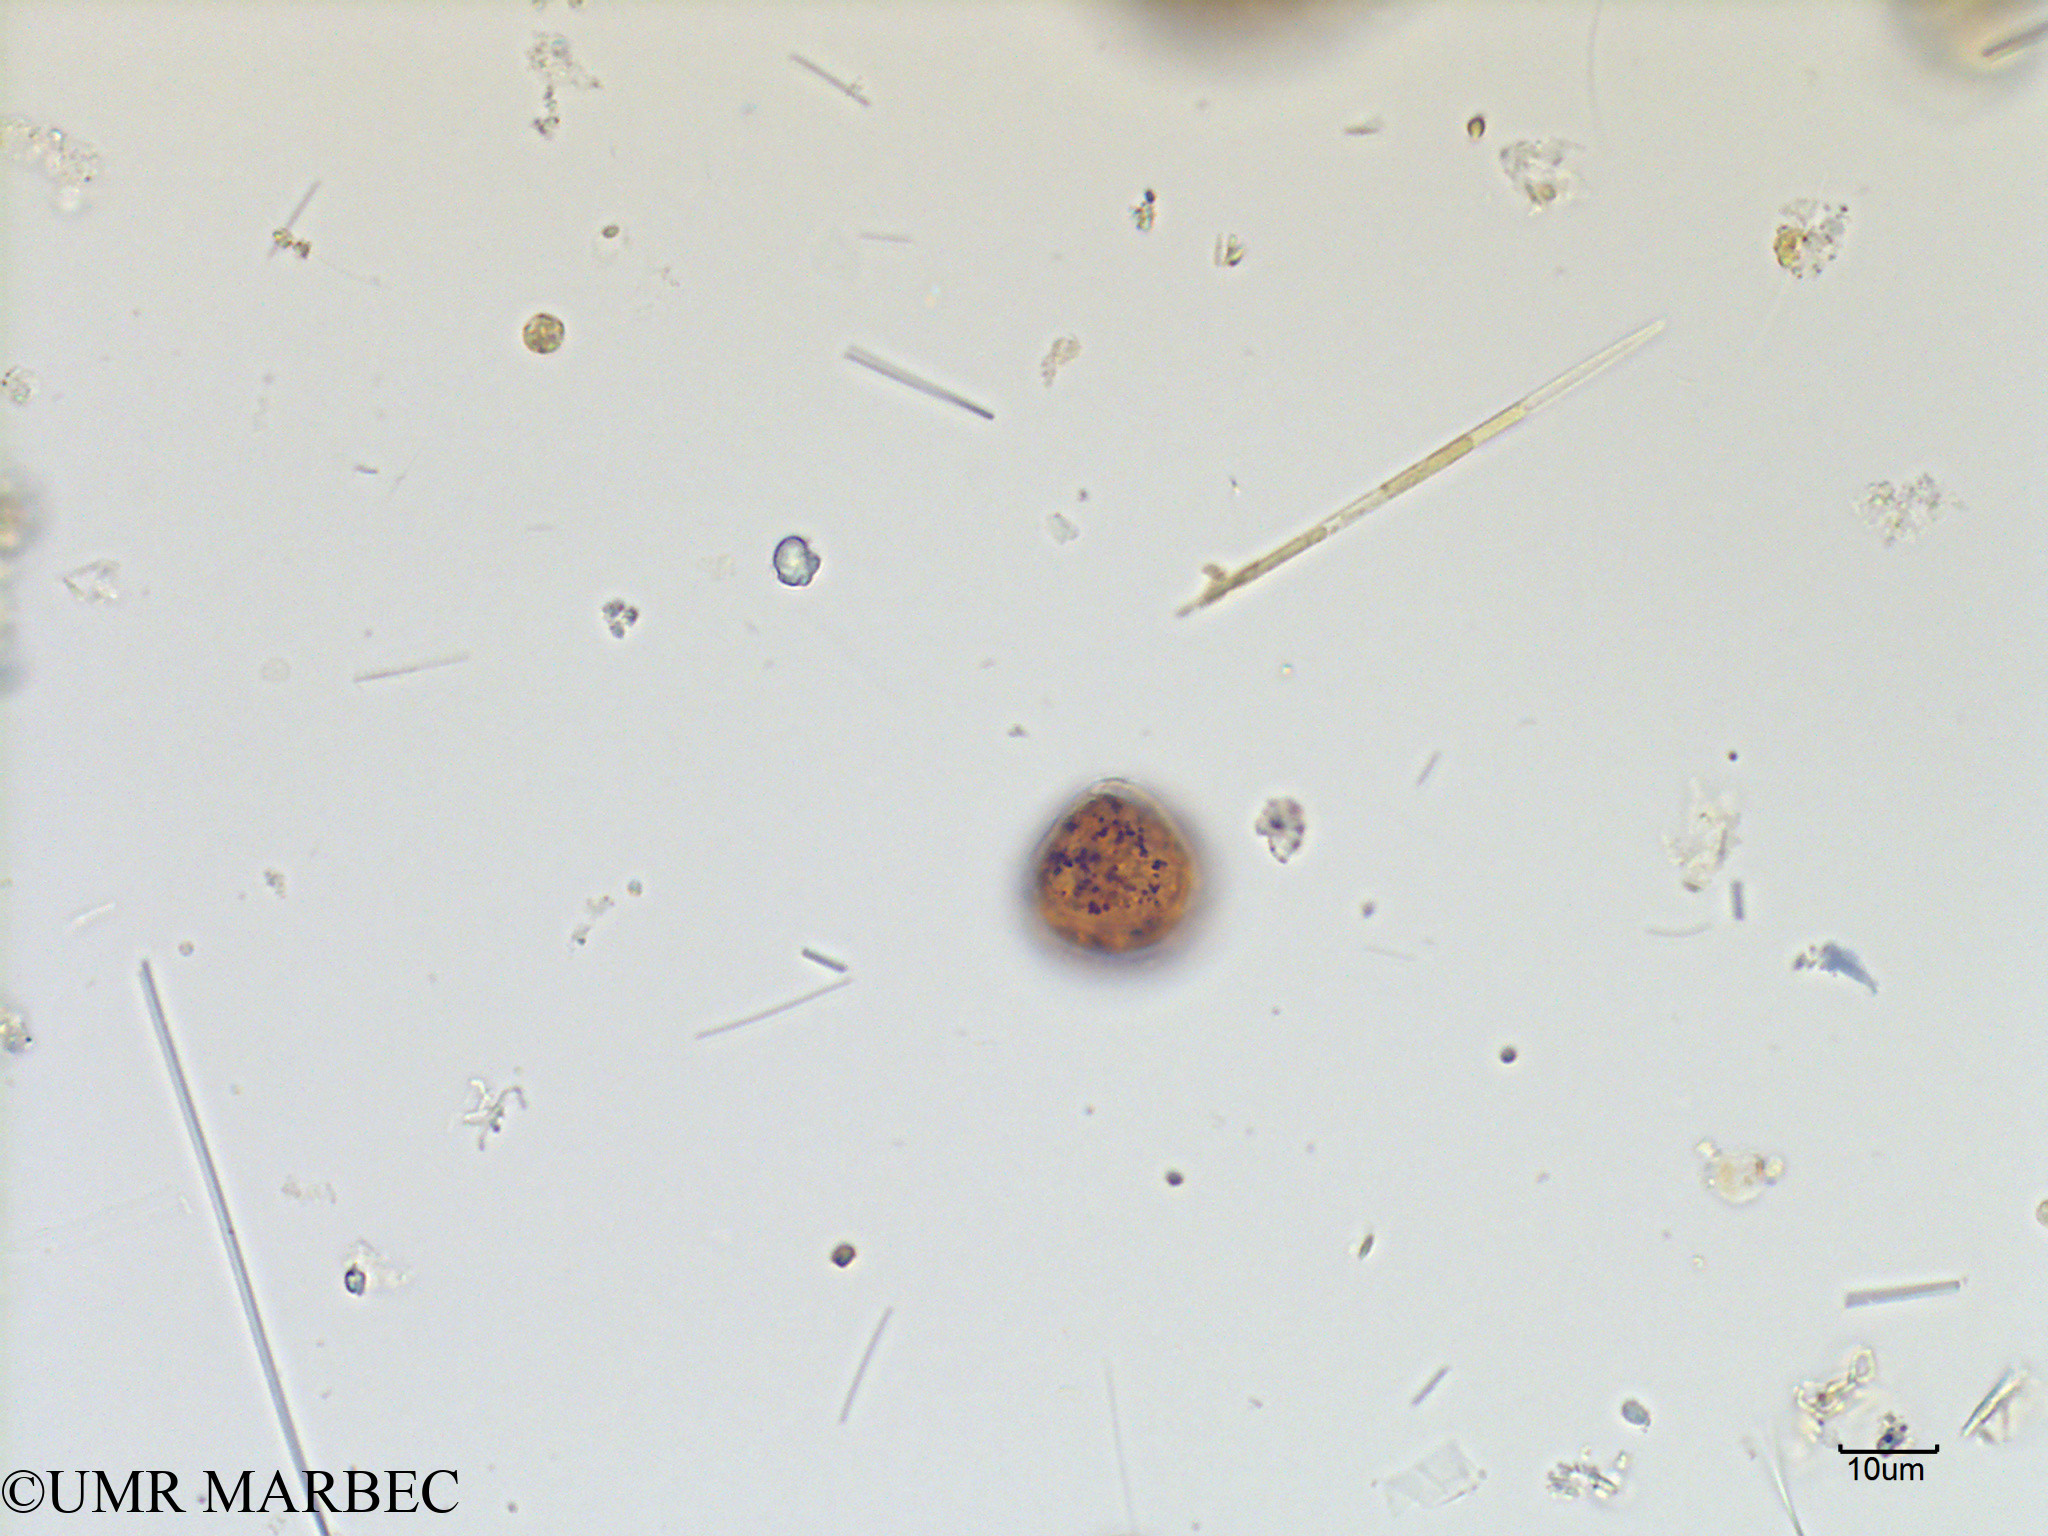 phyto/Scattered_Islands/mayotte_lagoon/SIREME May 2016/Protoperidinium sp52 (MAY7_Protoperidinium bdd-8).tif(copy).jpg